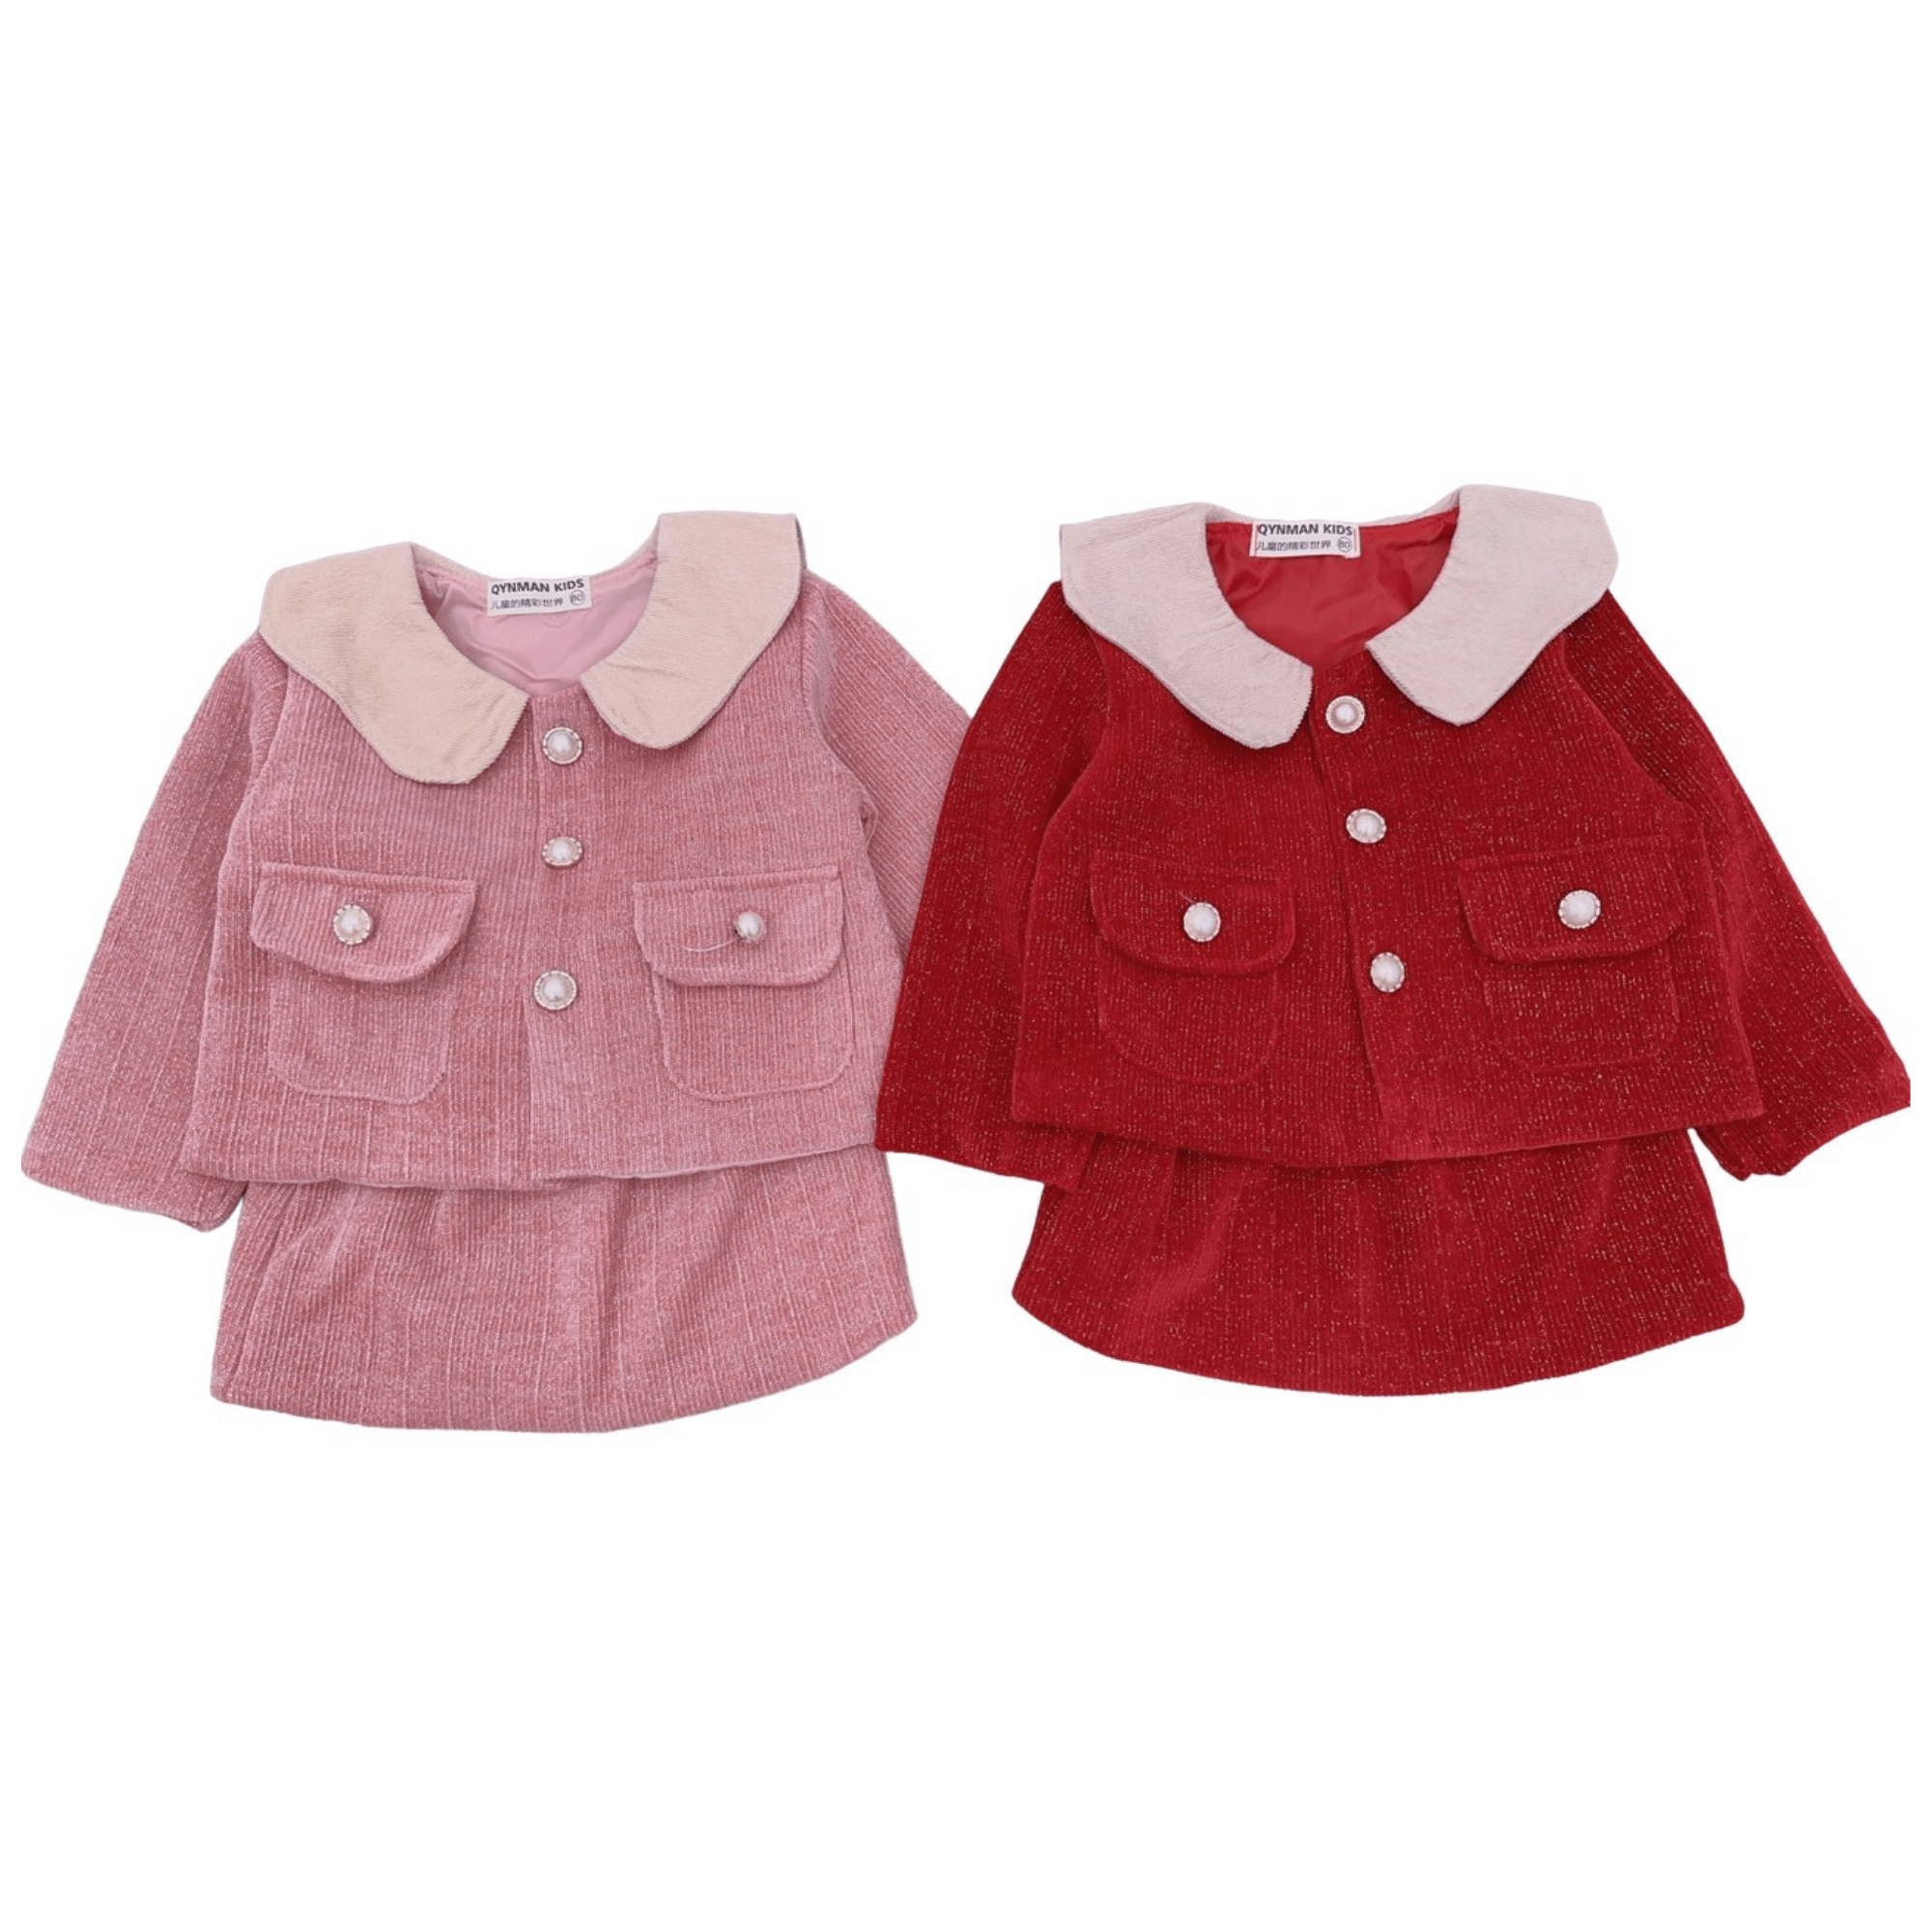 Winter Clothes For Kids Reasonable Price 100% Wool Dresses Casual Each One In Opp Bag Vietnam Manufacturer 8